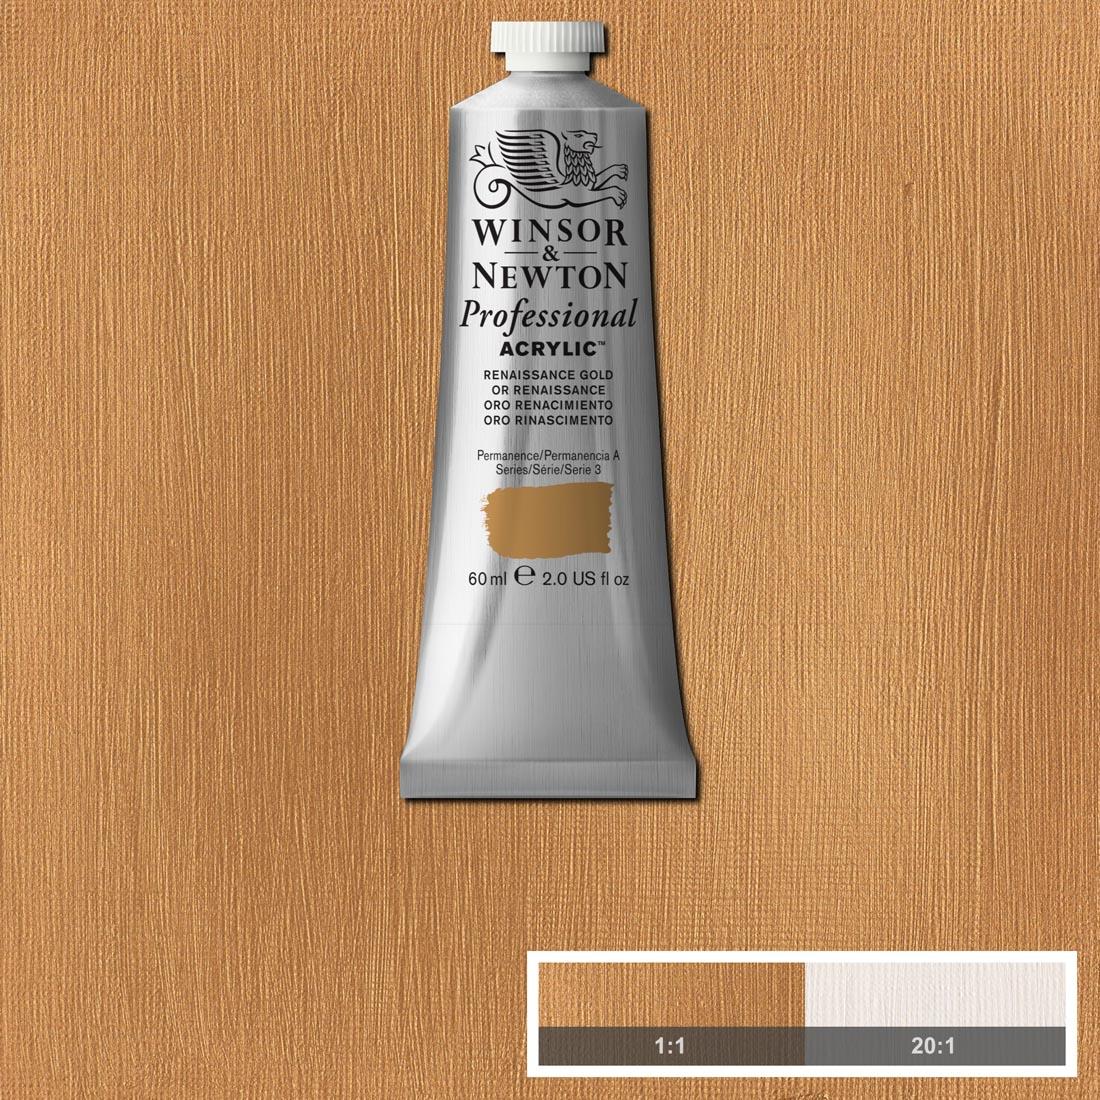 Tube of Renaissance Gold Winsor and Newton Professional Acrylic with paint swatch in the background